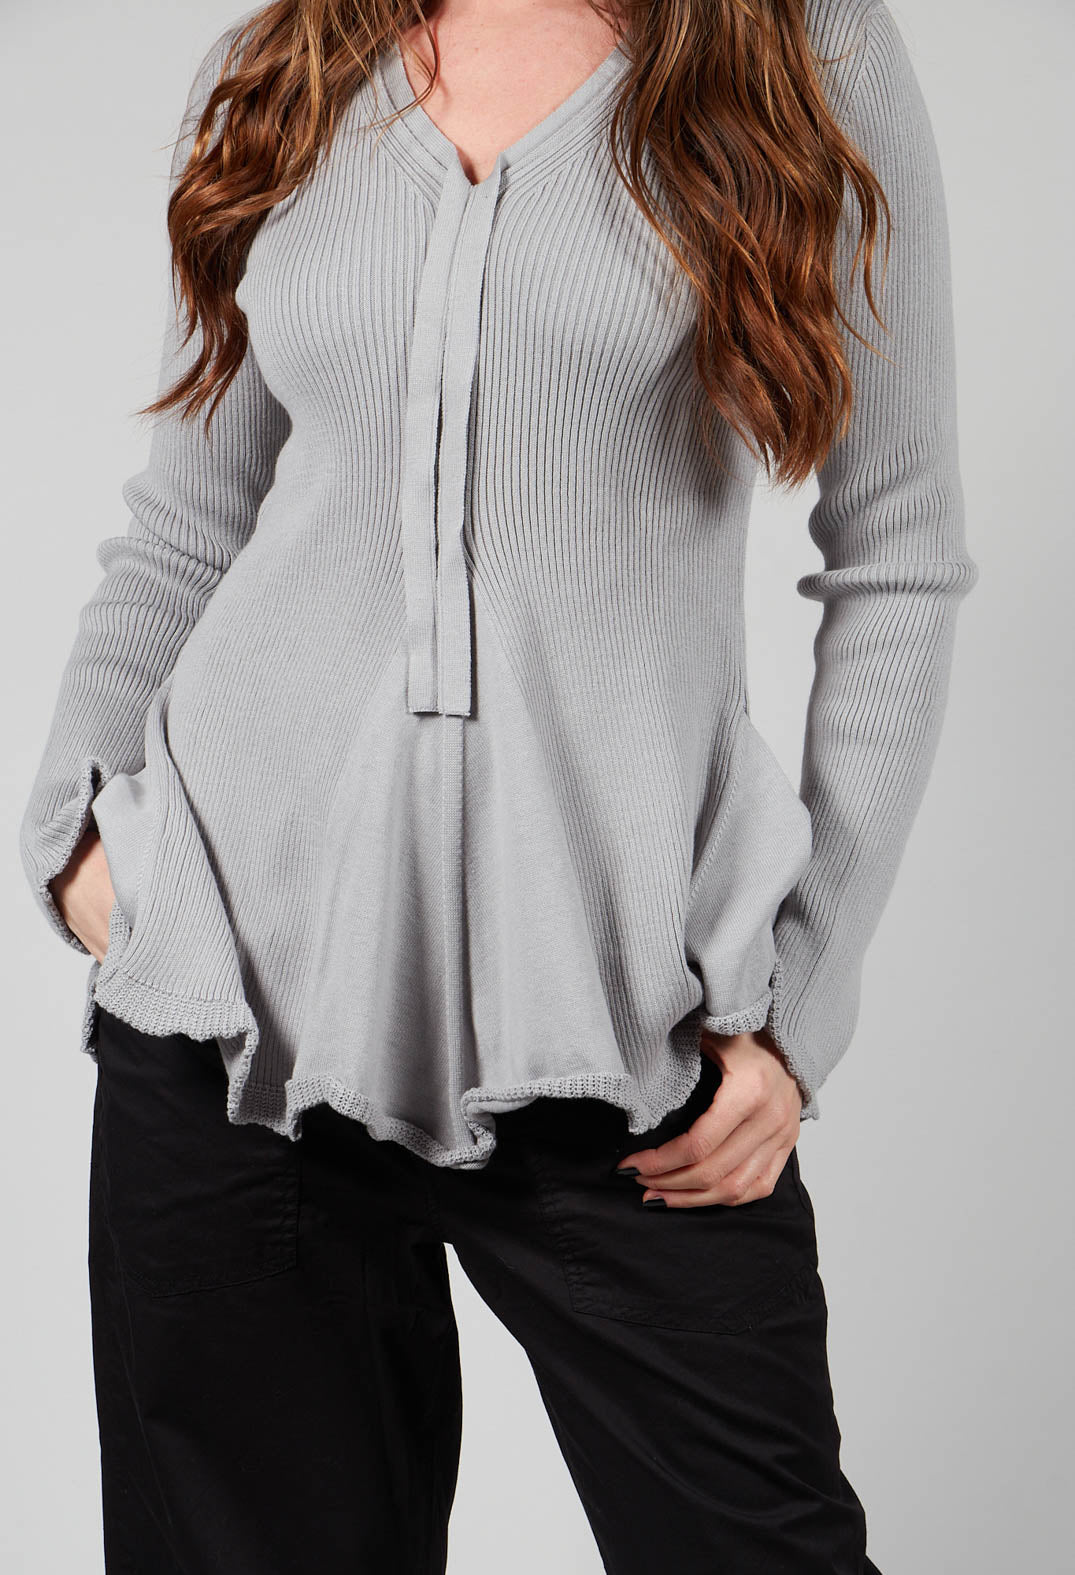 Cotton Knit in Light Grey